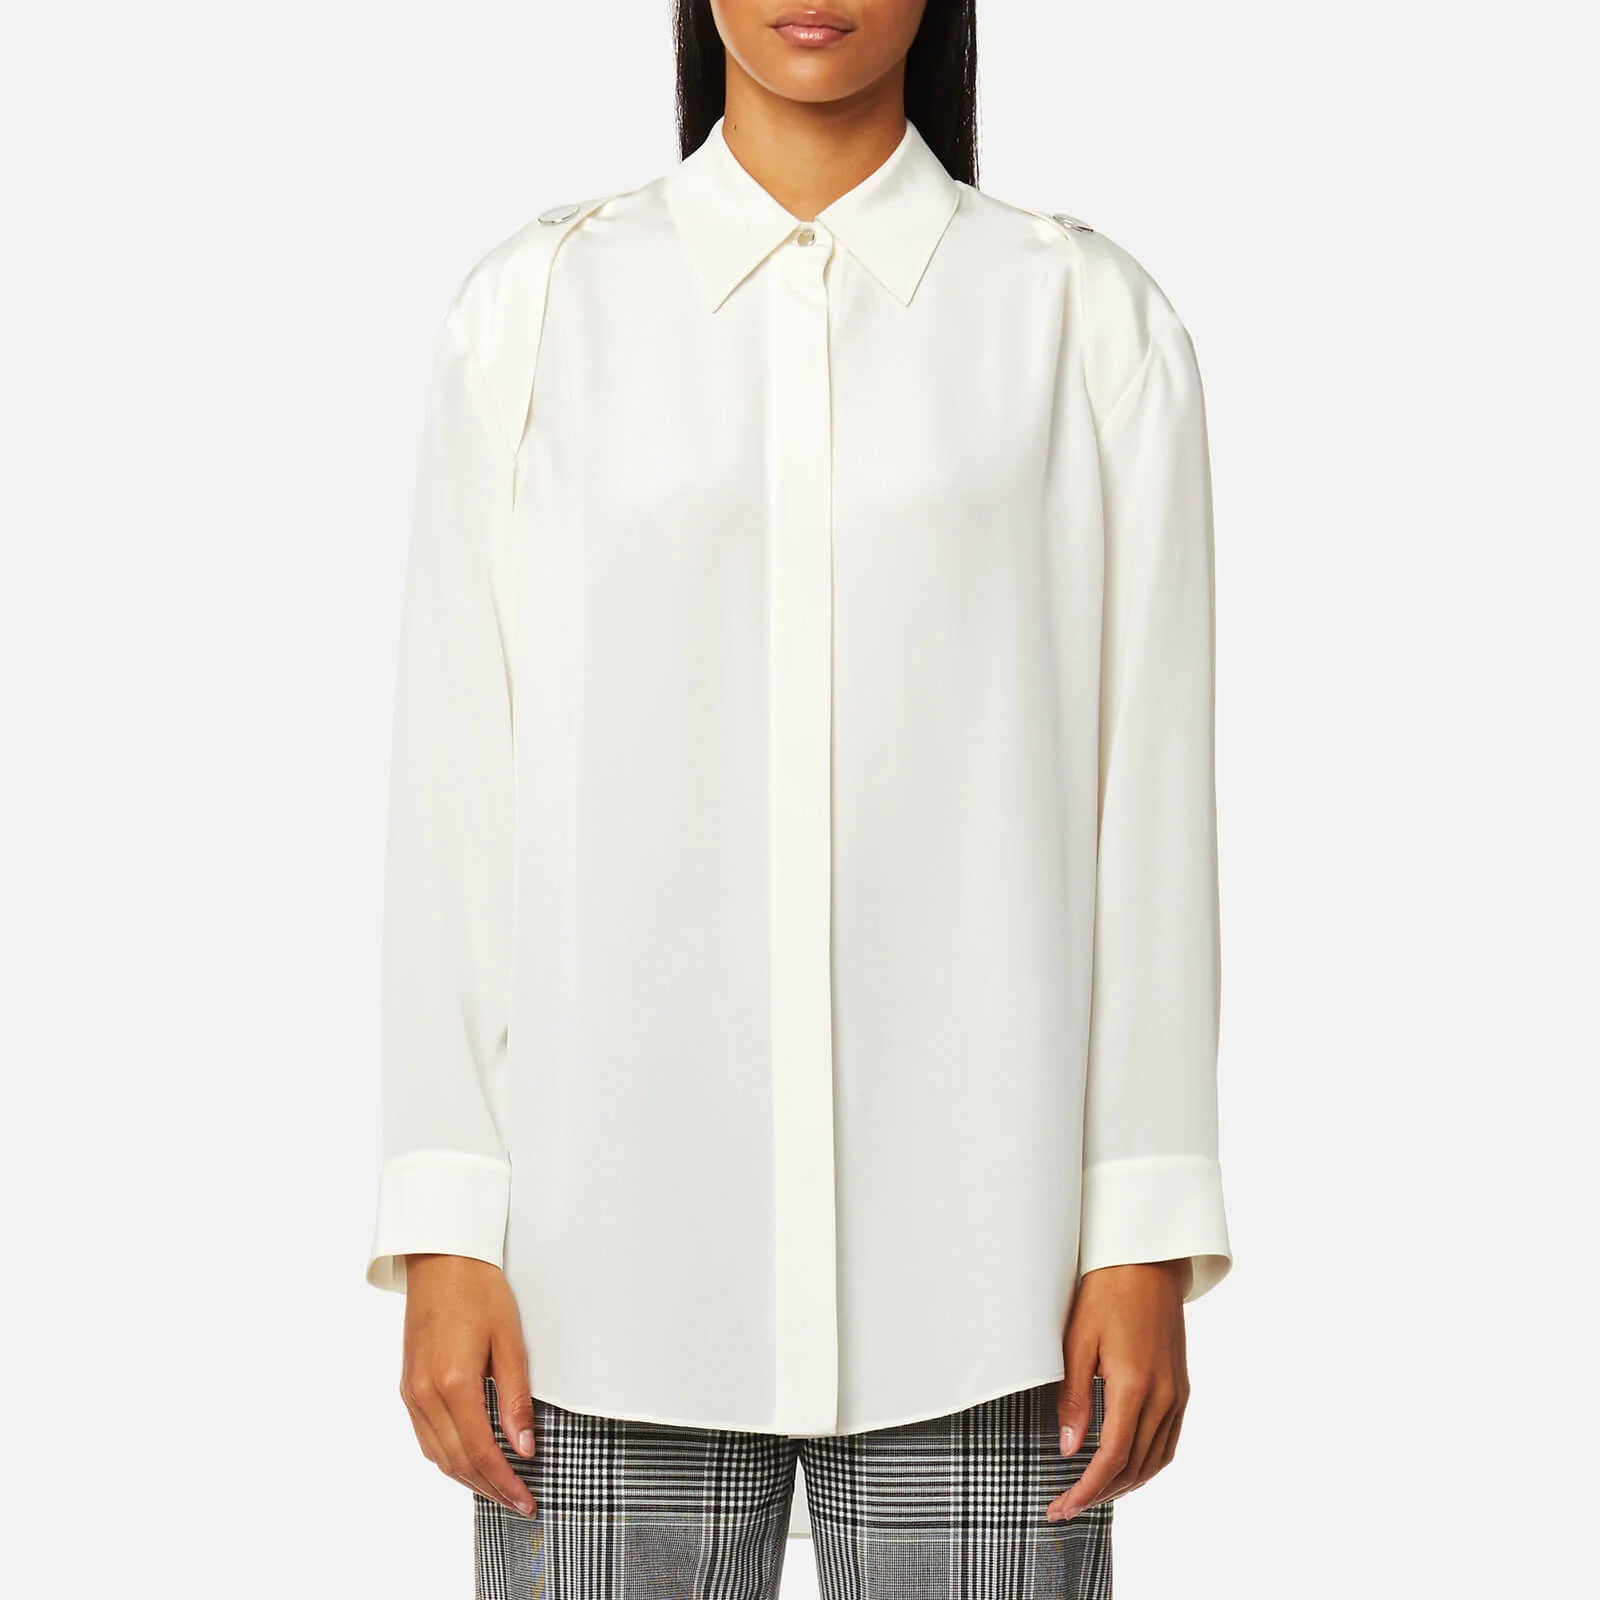 Alexander Wang Women's Button Down Shirt with Off The Shoulder Button Detail - Ivory Image 1